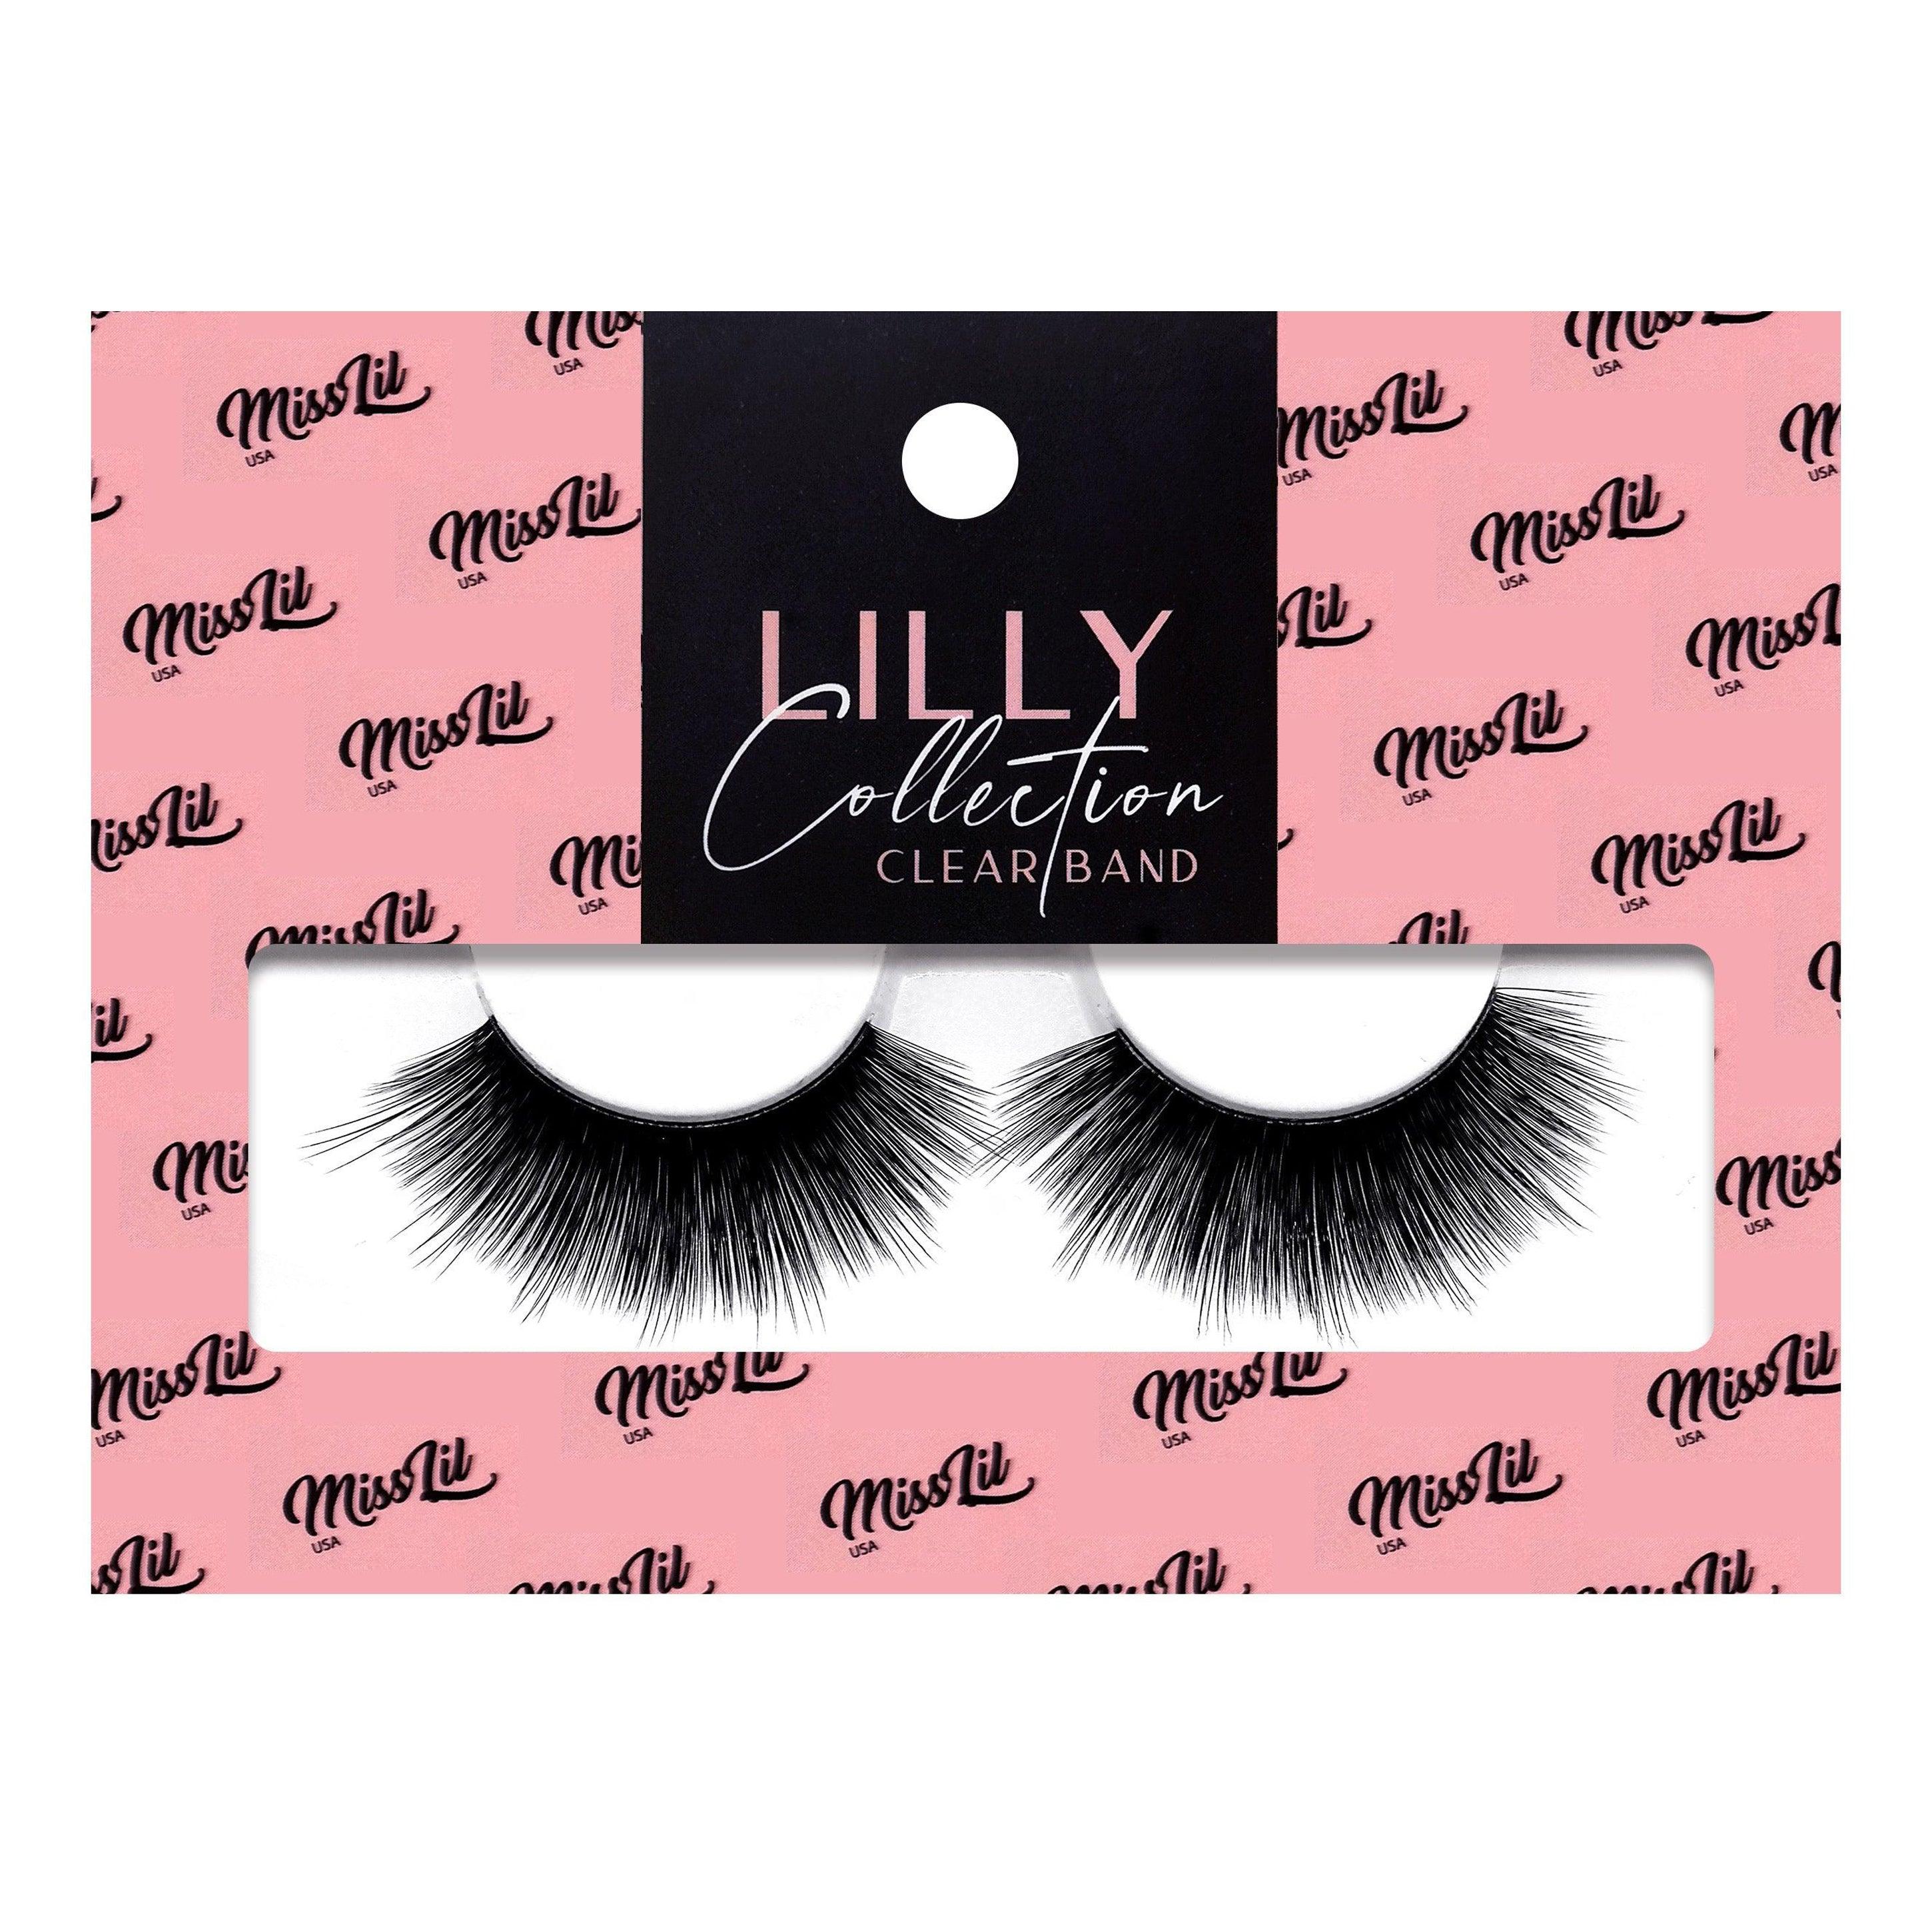 1-Pair Lashes-Lilly Collection #11 (Pack of 12) - Miss Lil USA Wholesale